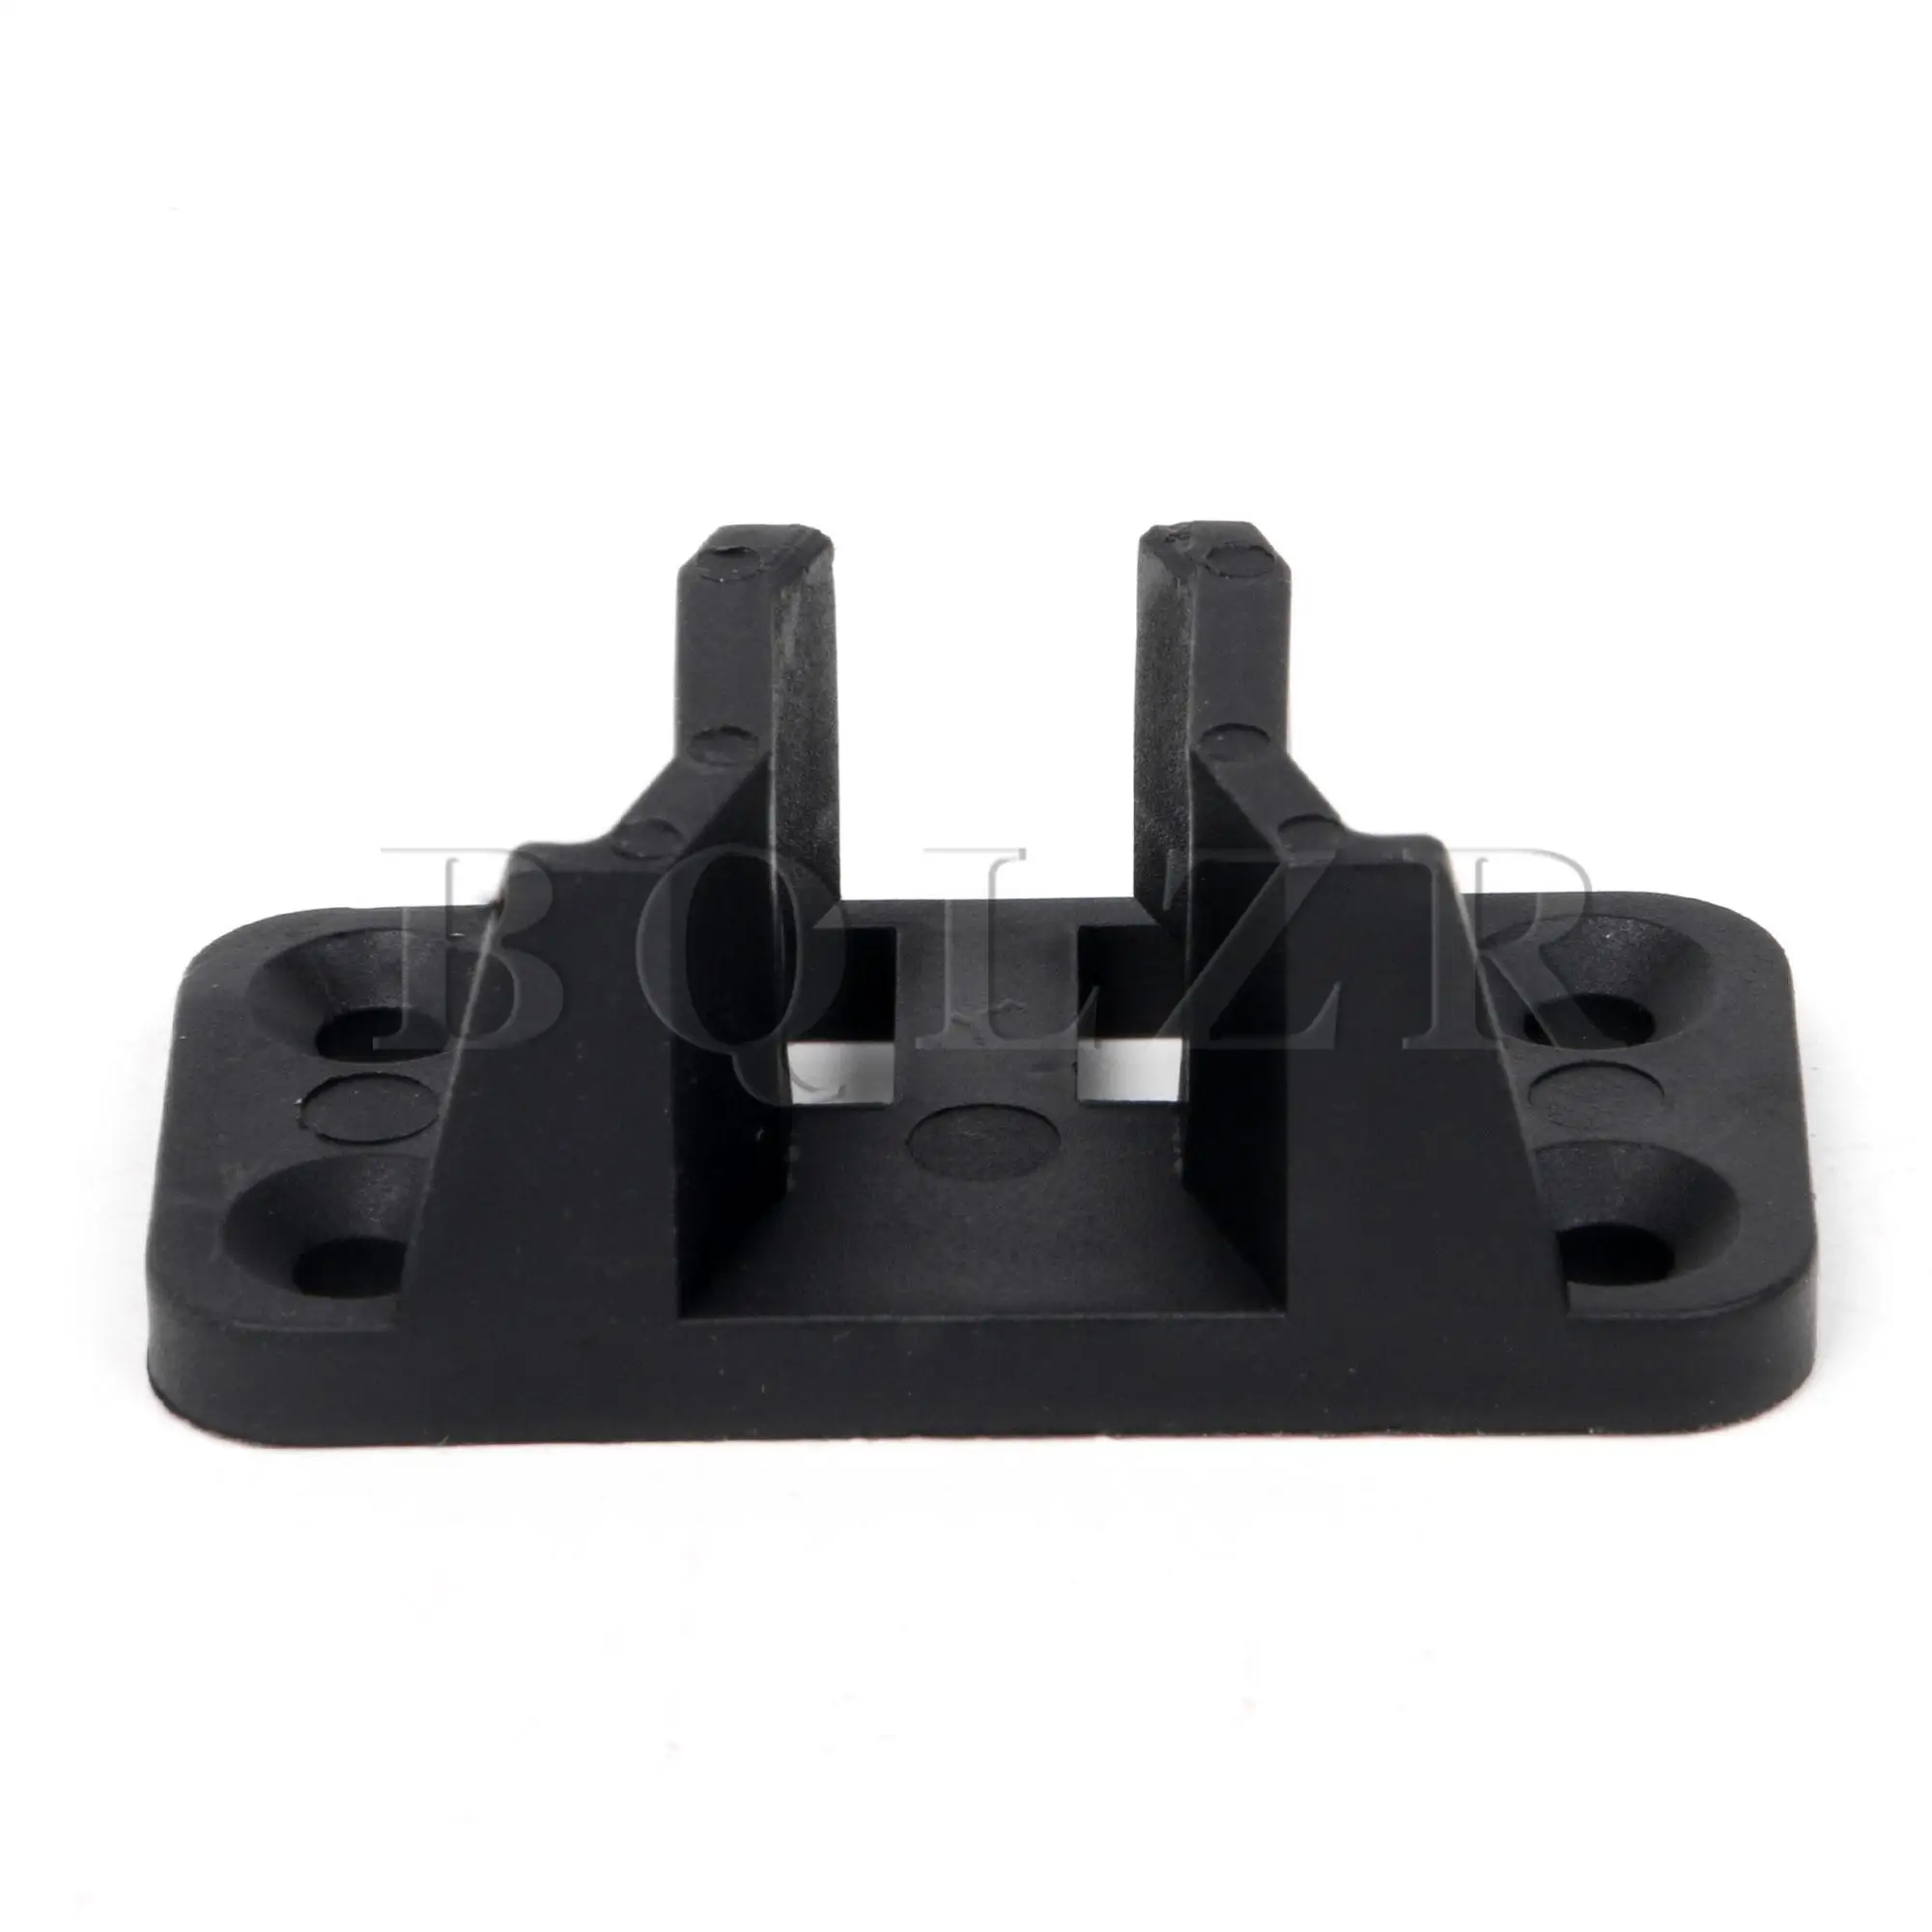 BQLZR 14x6cm Plastic Sectional Sofa Invisible Interlocking Sofa Connector Bracket with Hardware Pack of 6